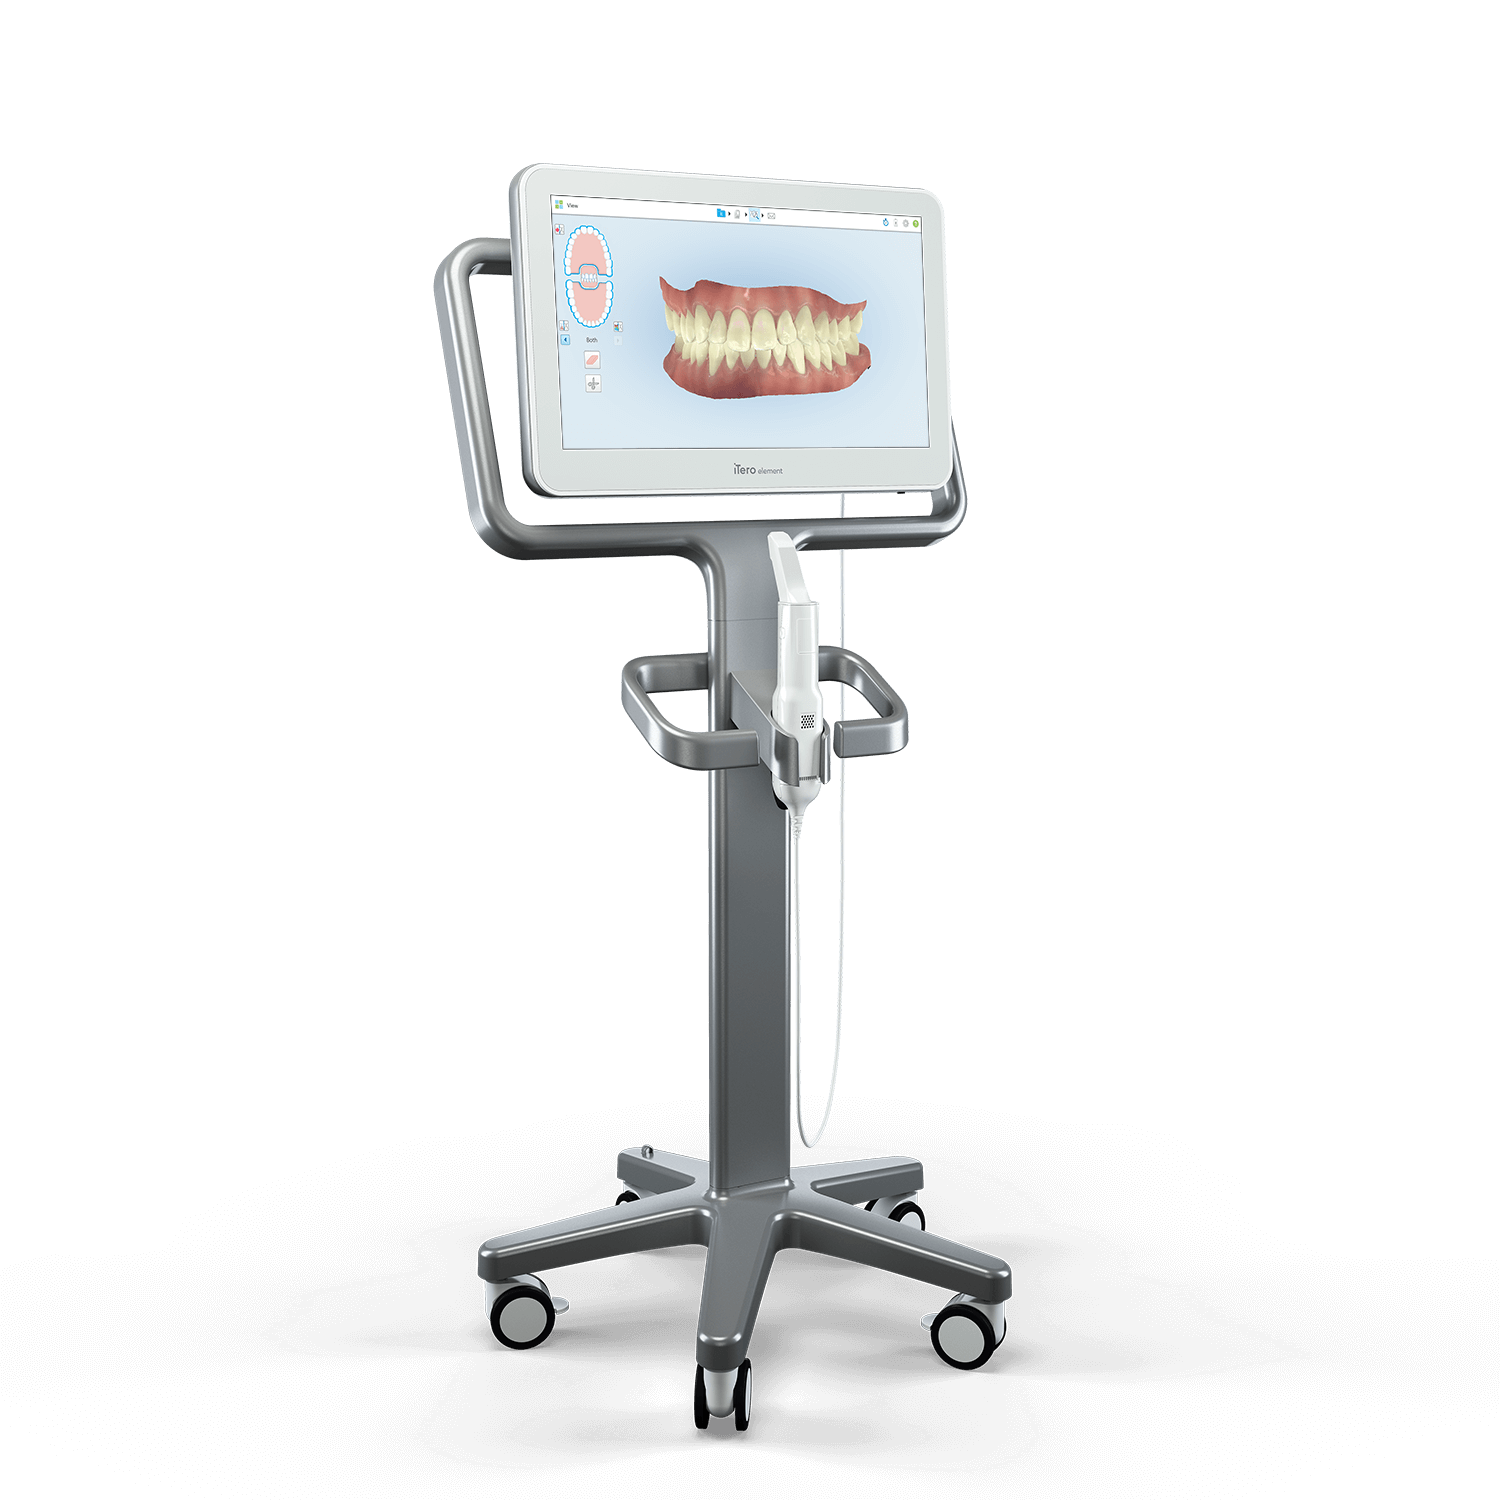 The Itero digital scanner is an intraoral camera that we can use at our West Bloomfield, Michigan dental office for digital impressions and dental X-rays.